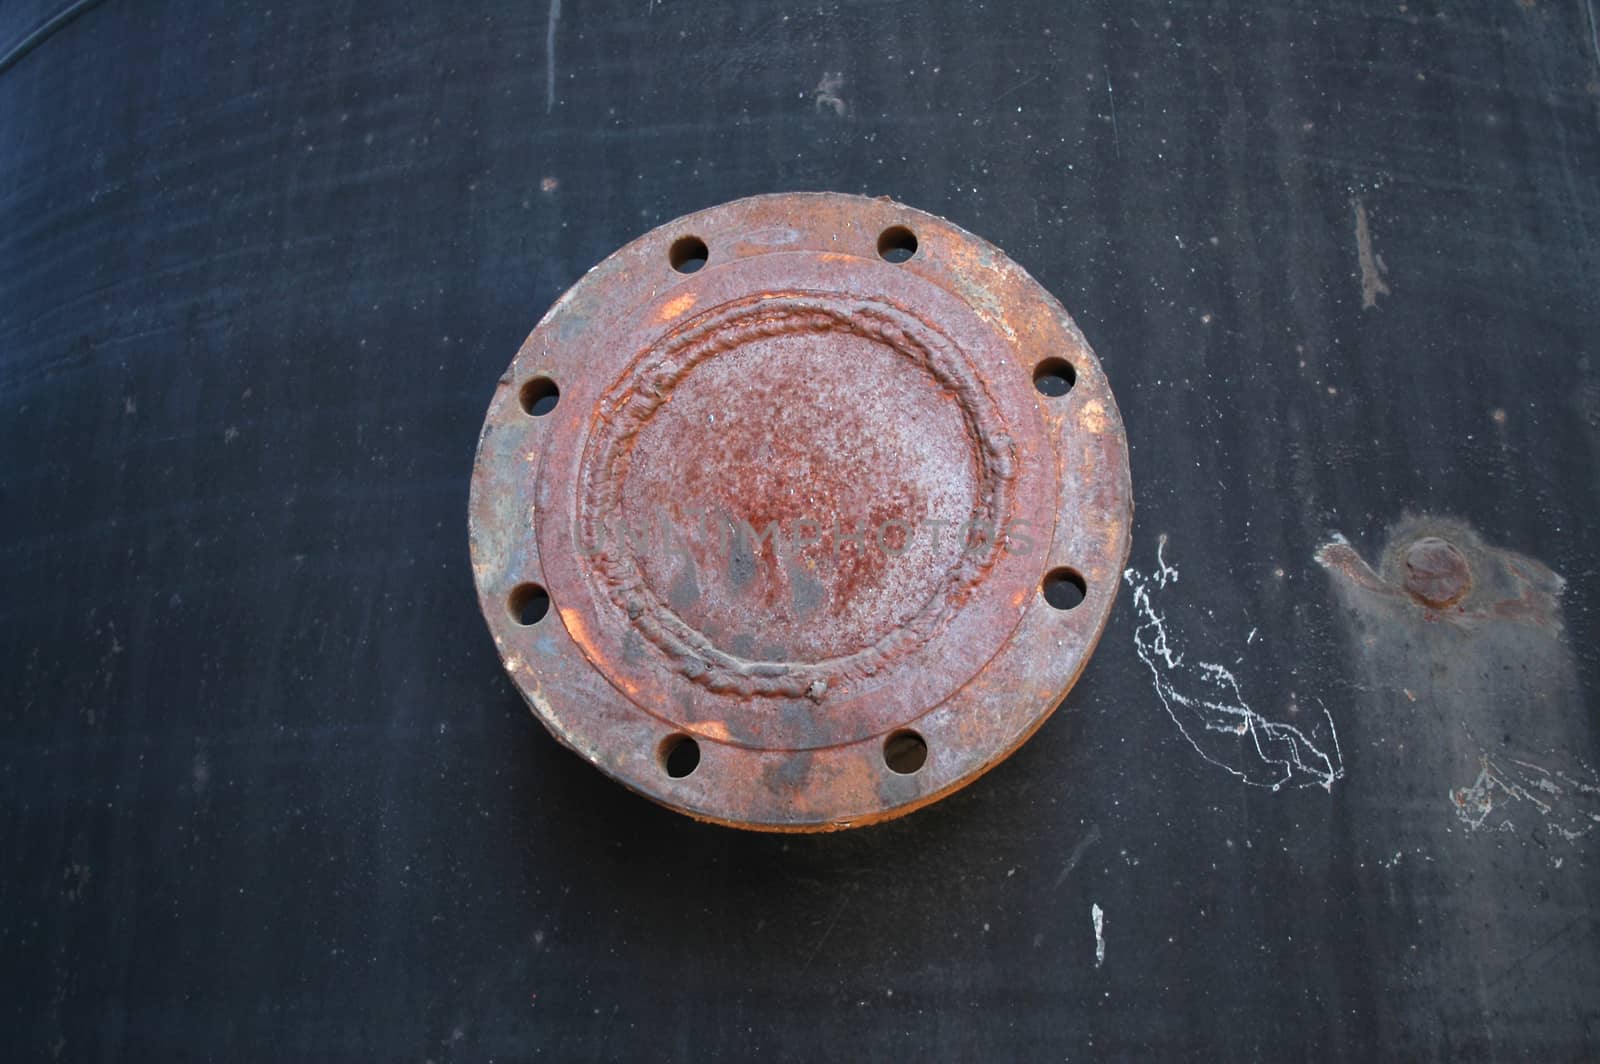 A rusted, reddish release valve with a circle of open holes all round on a dark, charcoal background.